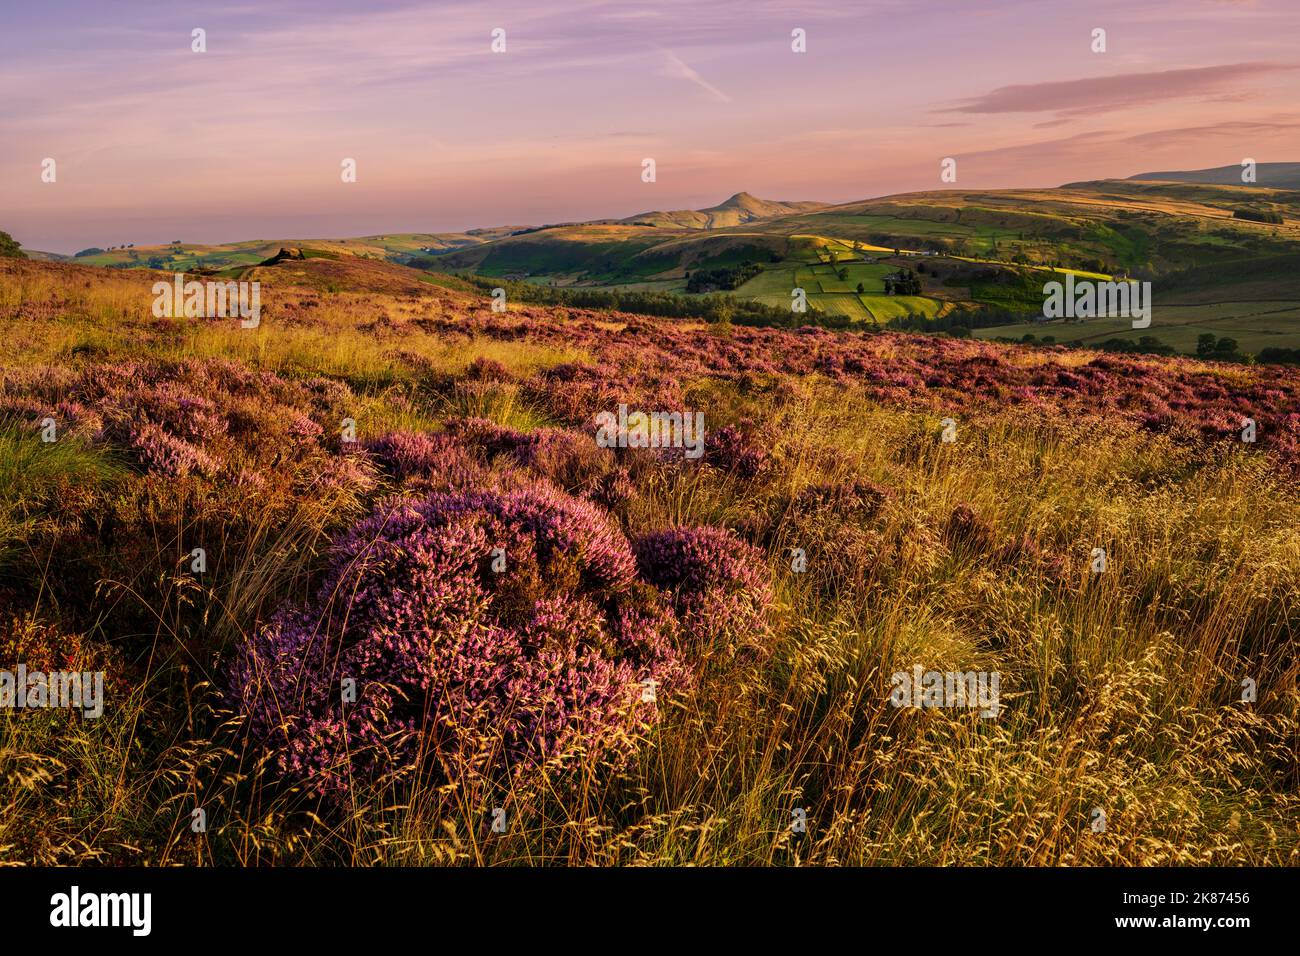 The summer view of Shutlinsloe with heather, Wildboarclough, Cheshire, England, United Kingdom, Europe Stock Photo